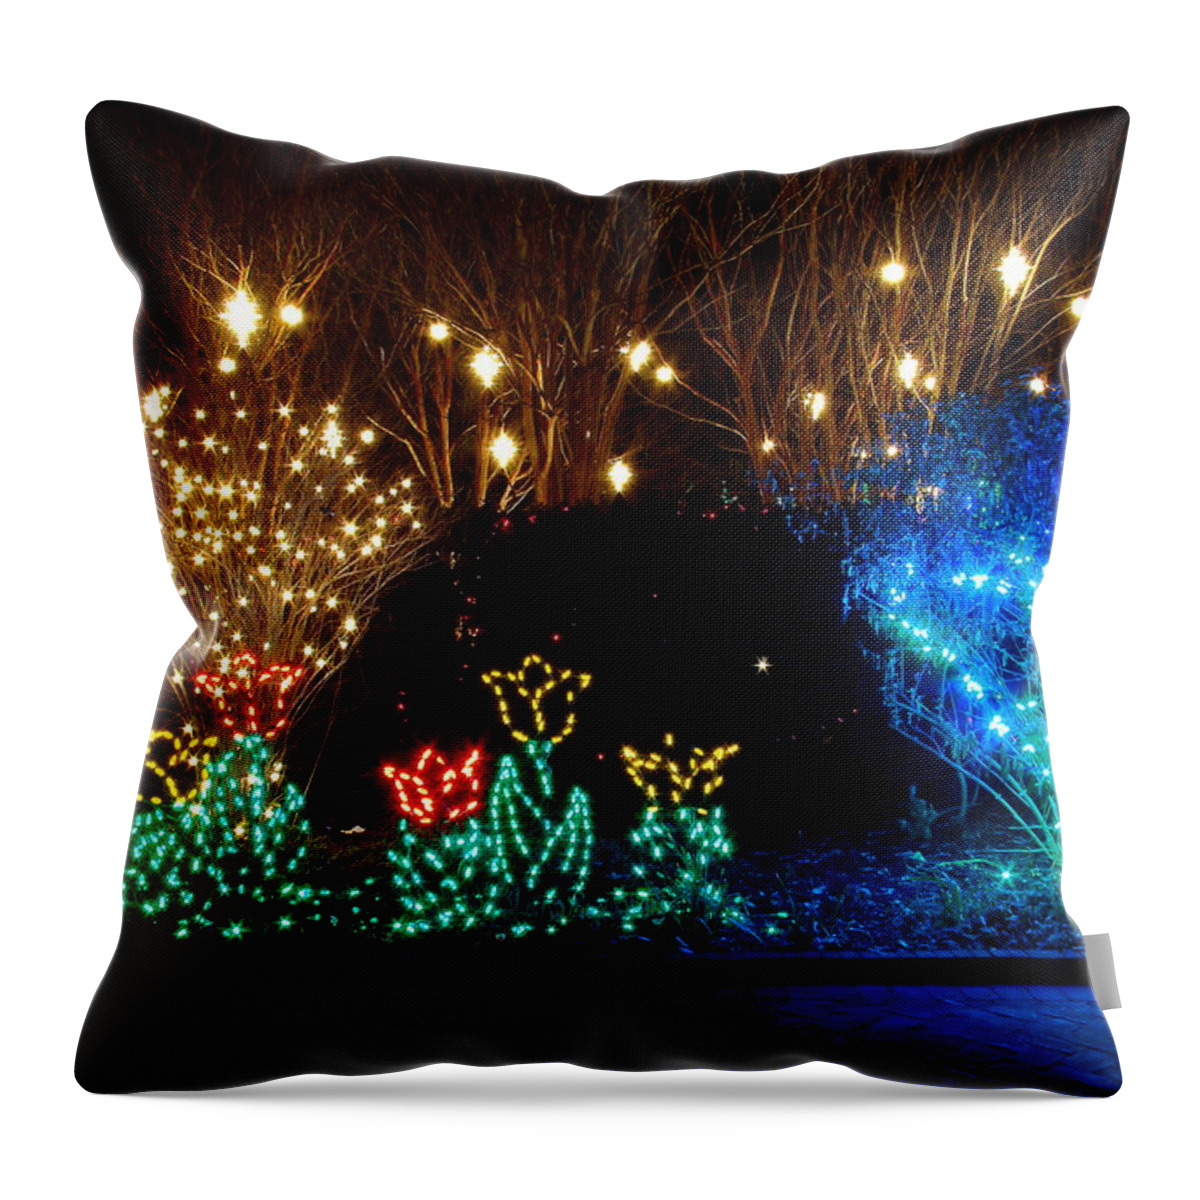 Holidays Throw Pillow featuring the photograph Along The Walk by Rodney Lee Williams